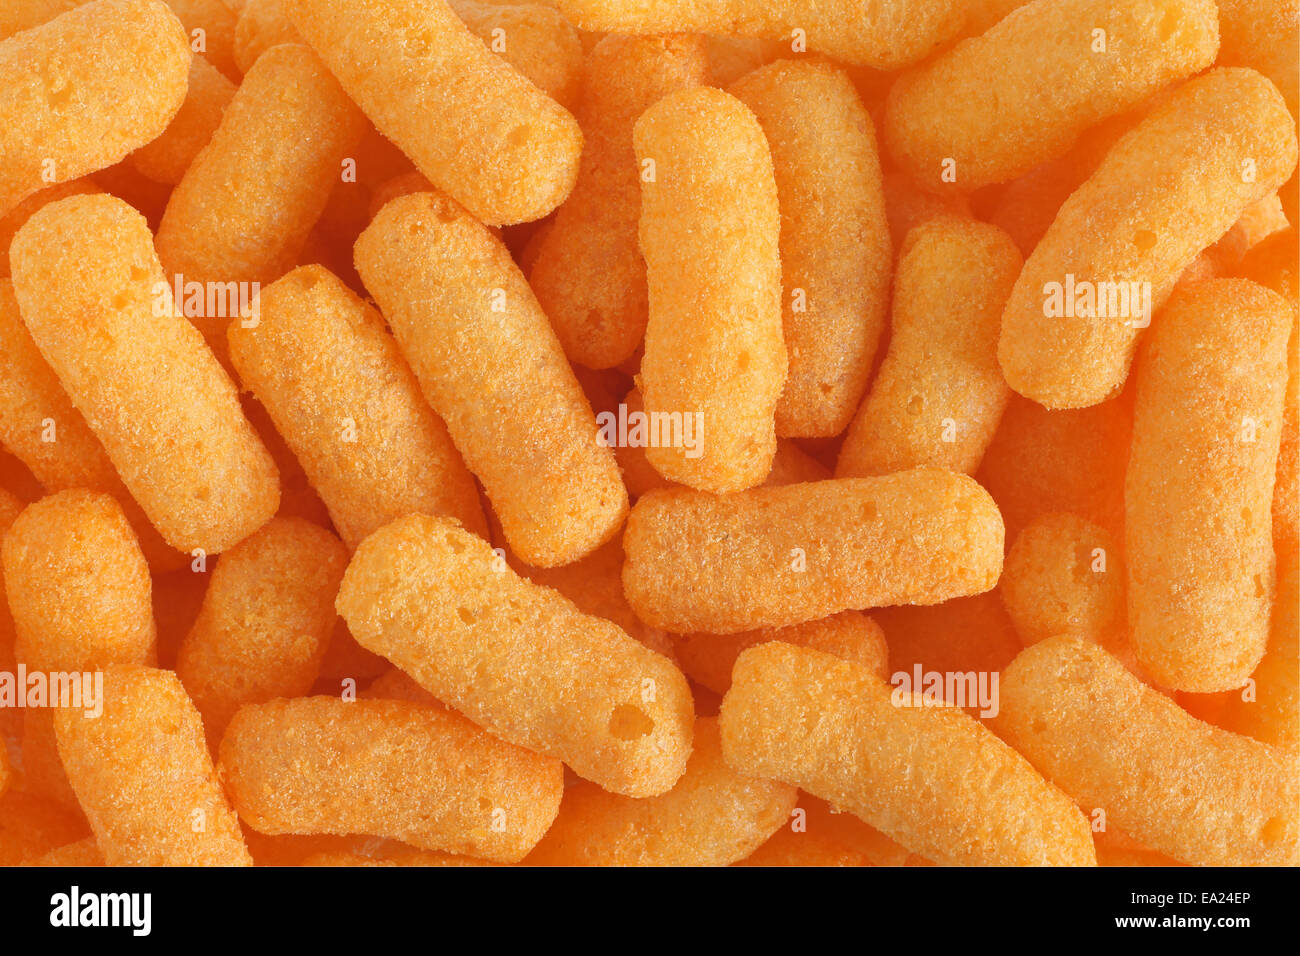 Cheese flavored puffed corn snack Stock Photo